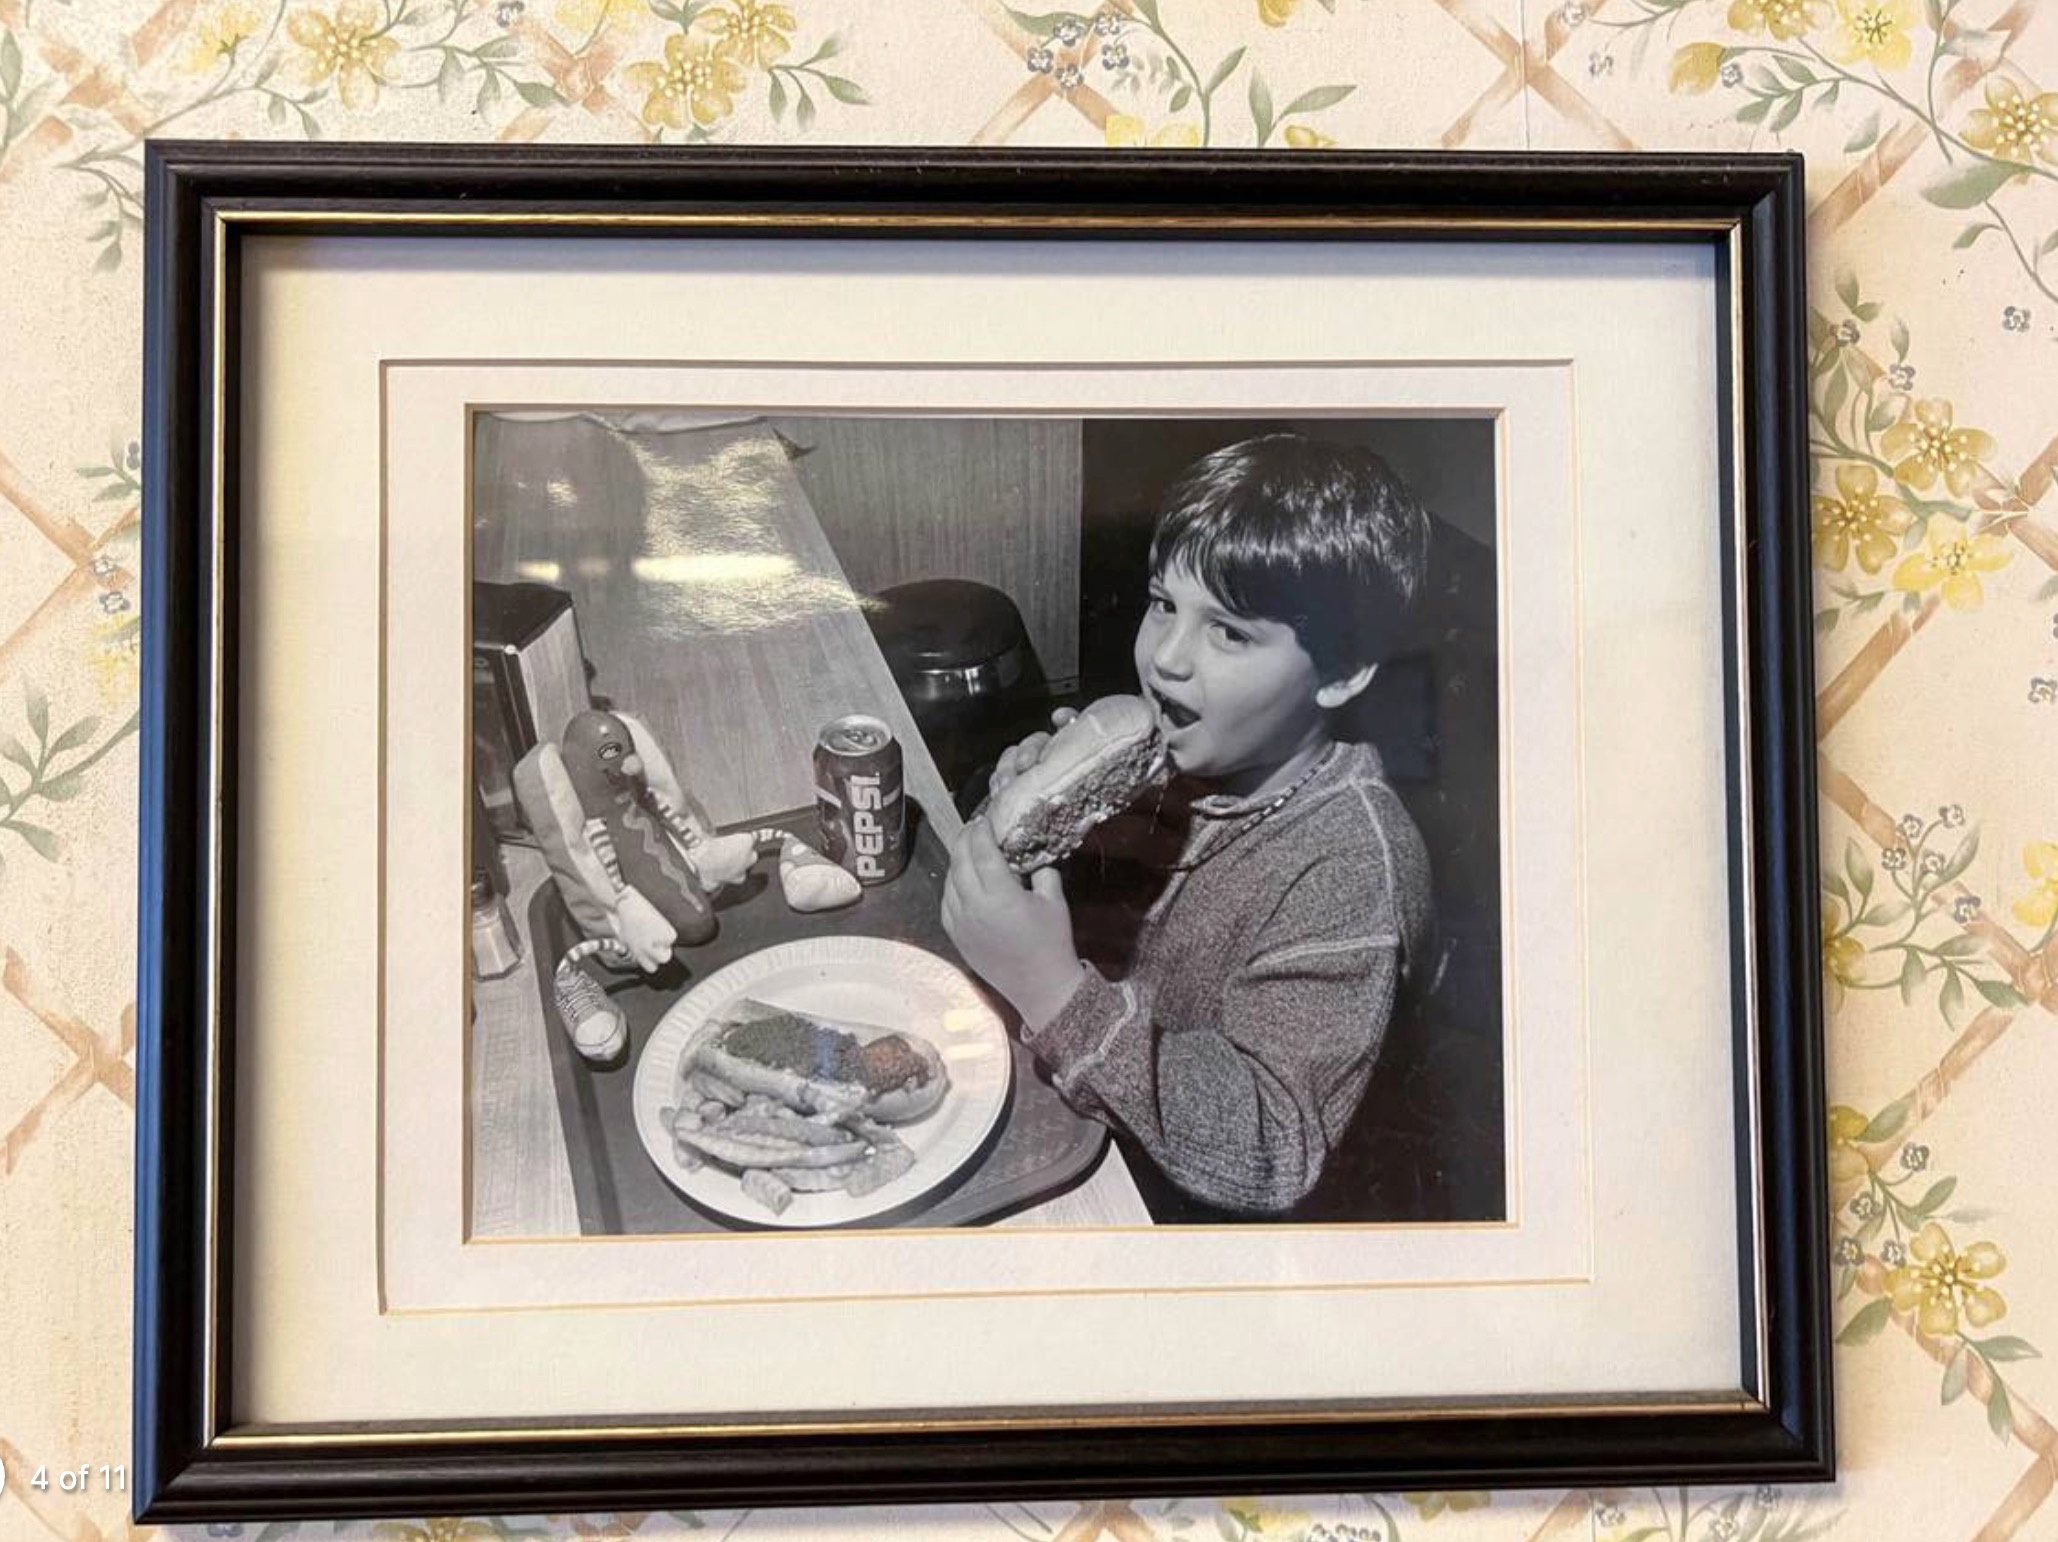  Nick Sikiodtis is immortalized on the wall in this photo when he was a child eating at Green’s Lunch in Uptown Charlotte. Photo by Alex Cason , CharlotteFive.  